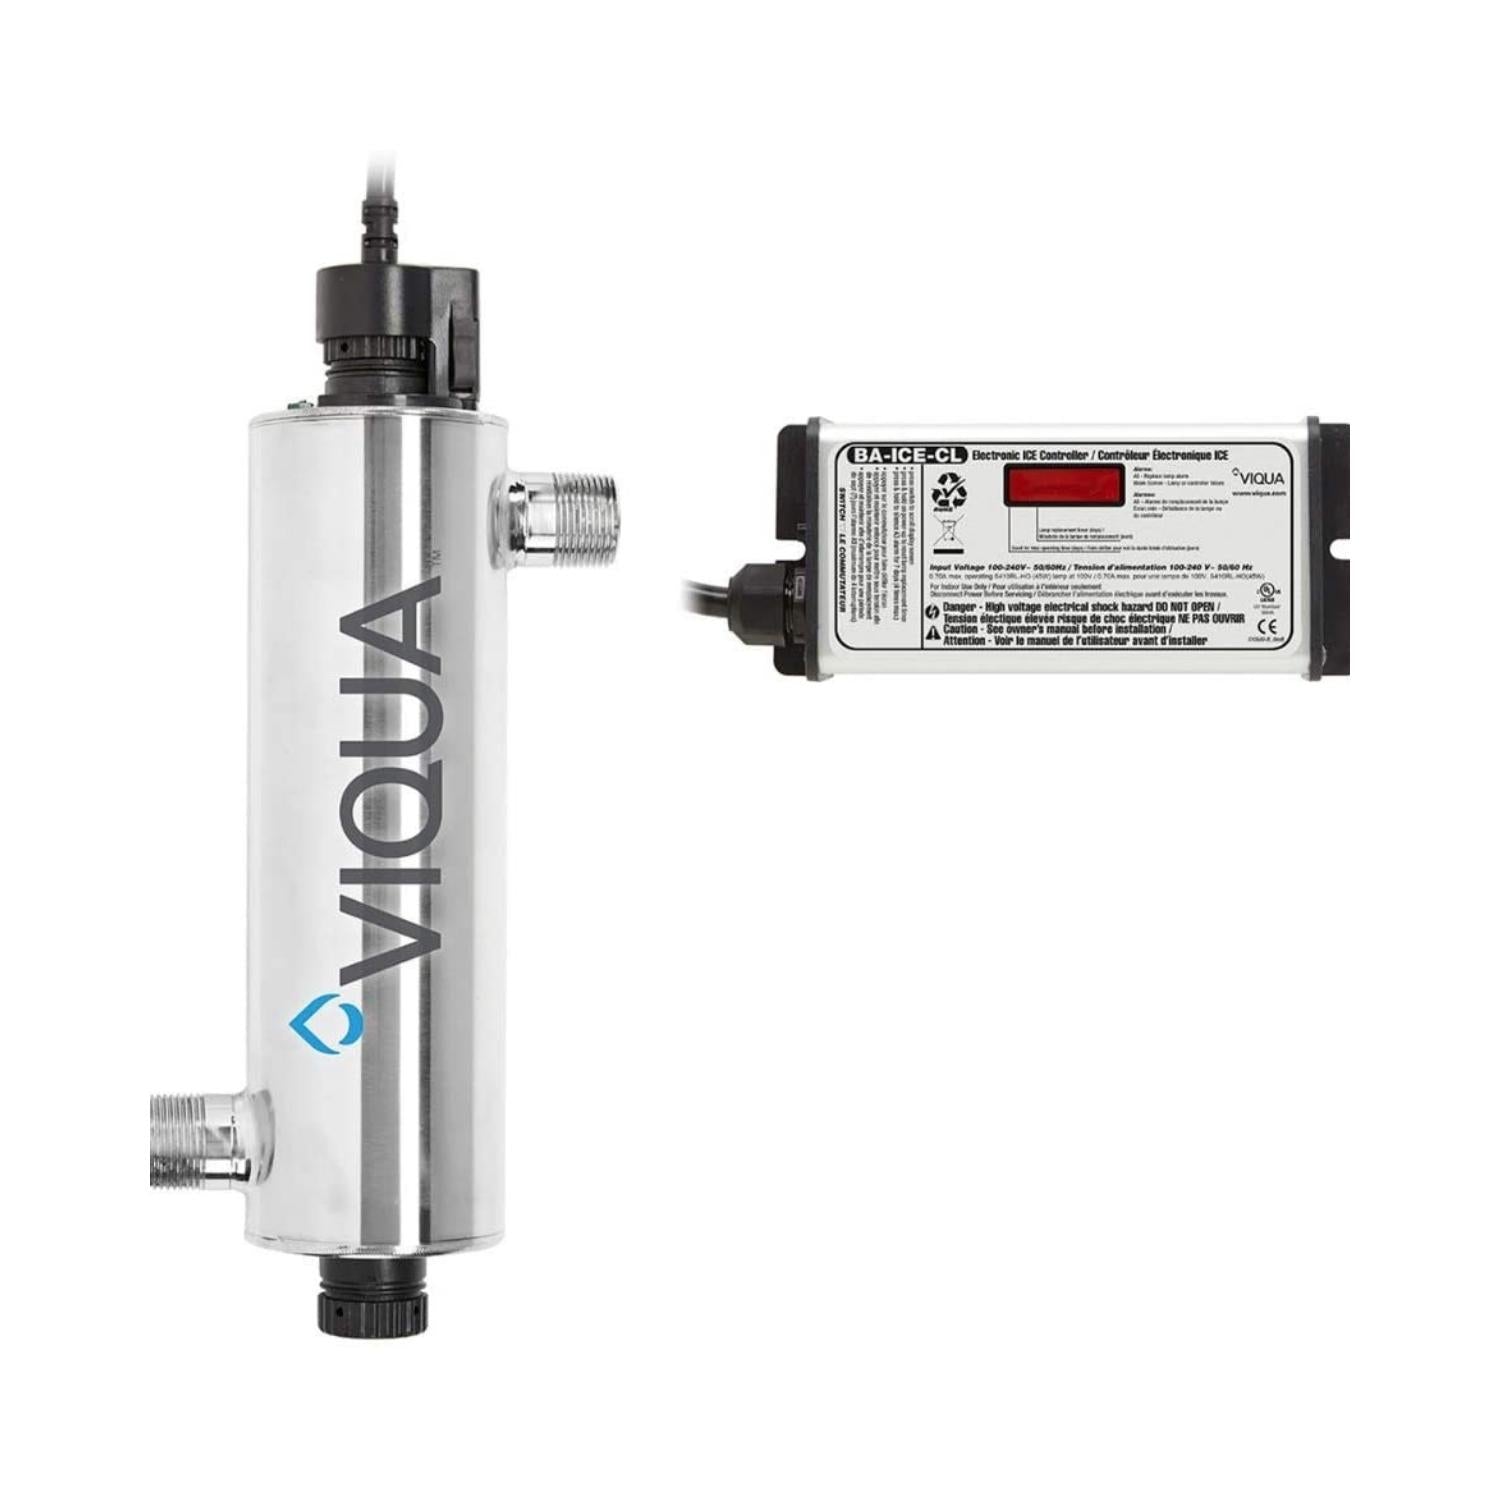 Stainless Steel High Output UV Water Disinfection System - RKIN